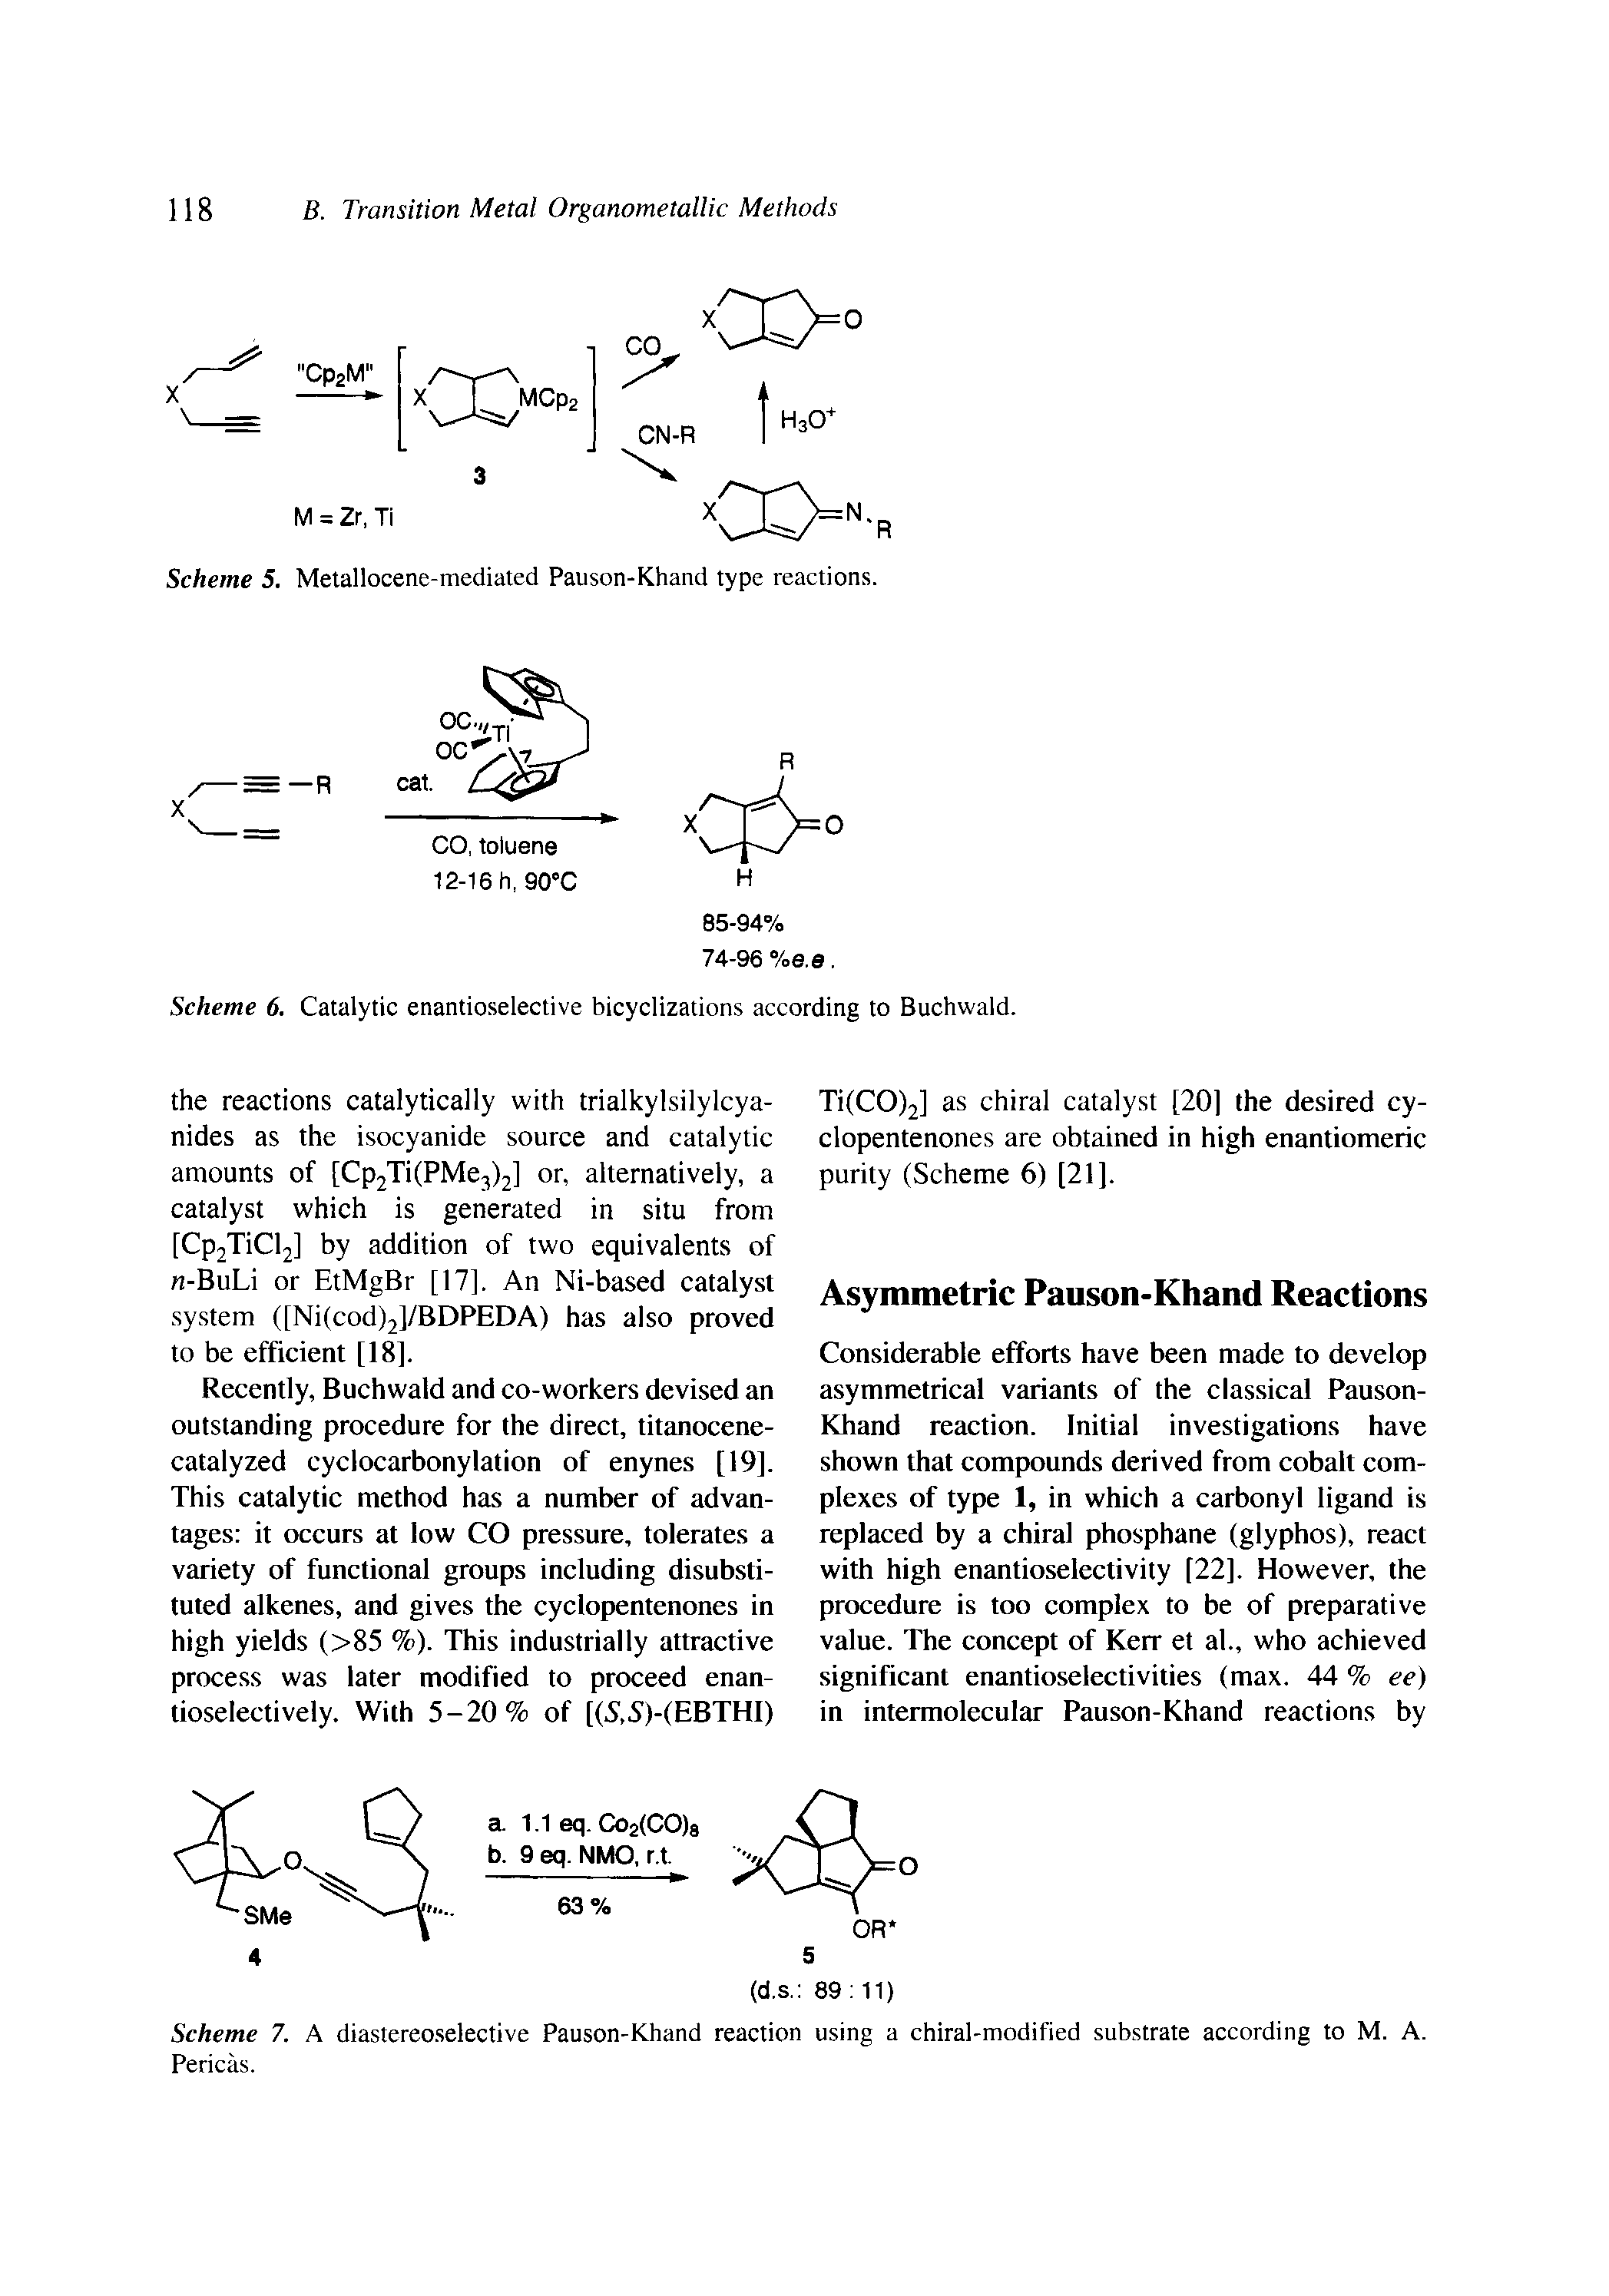 Scheme 7. A diastereoselective Pauson-Khand reaction using a chiral-modified substrate according to M. A. Pericas.